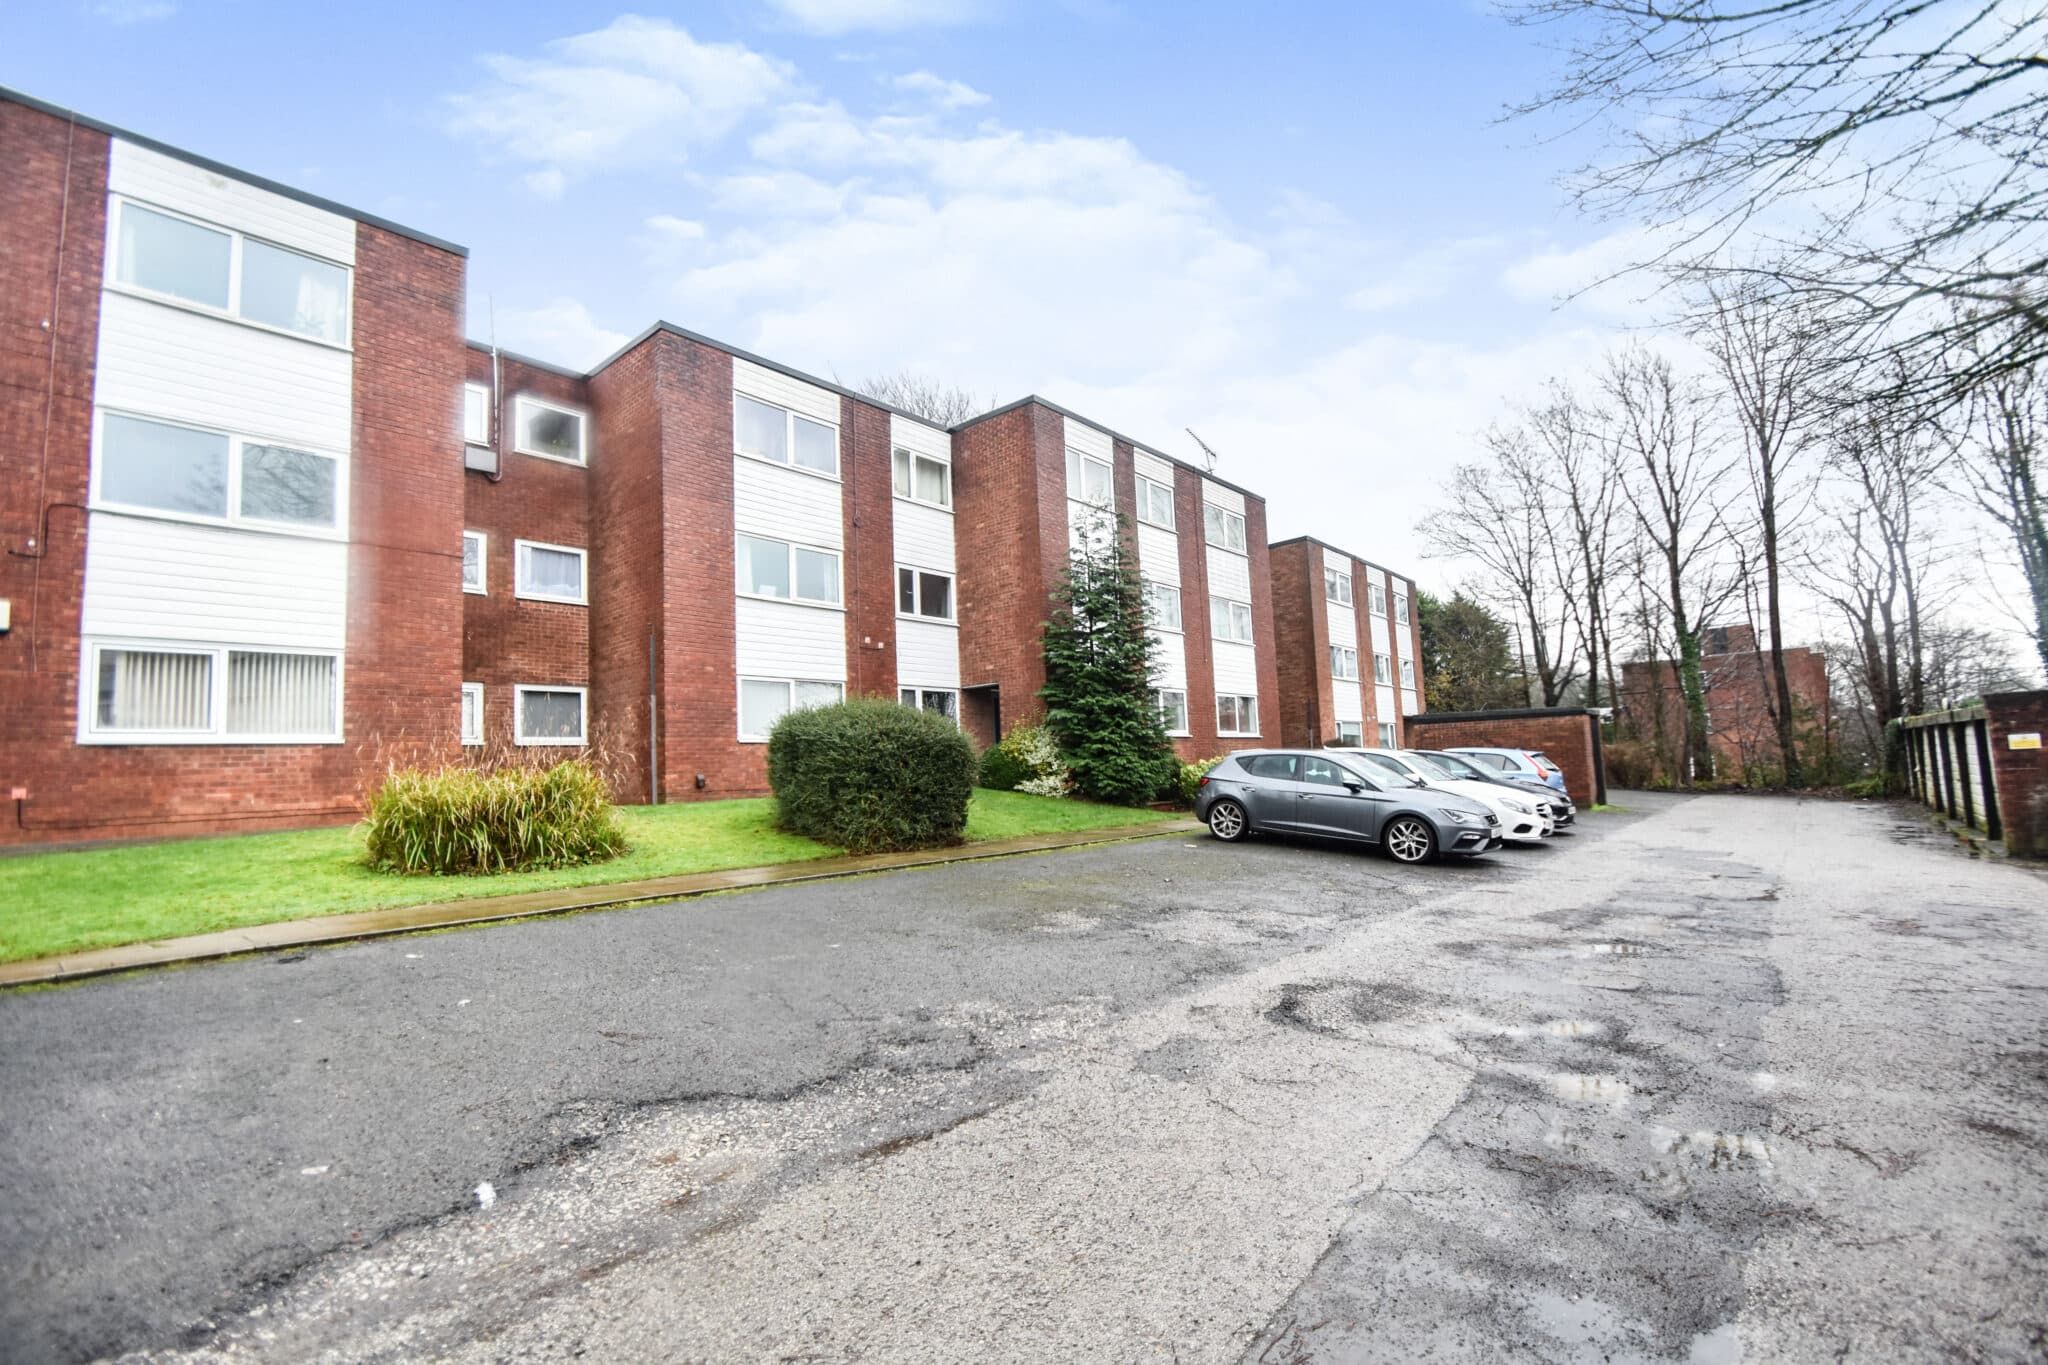 Flat 48, Moor End Court, Salford, M7 3PA